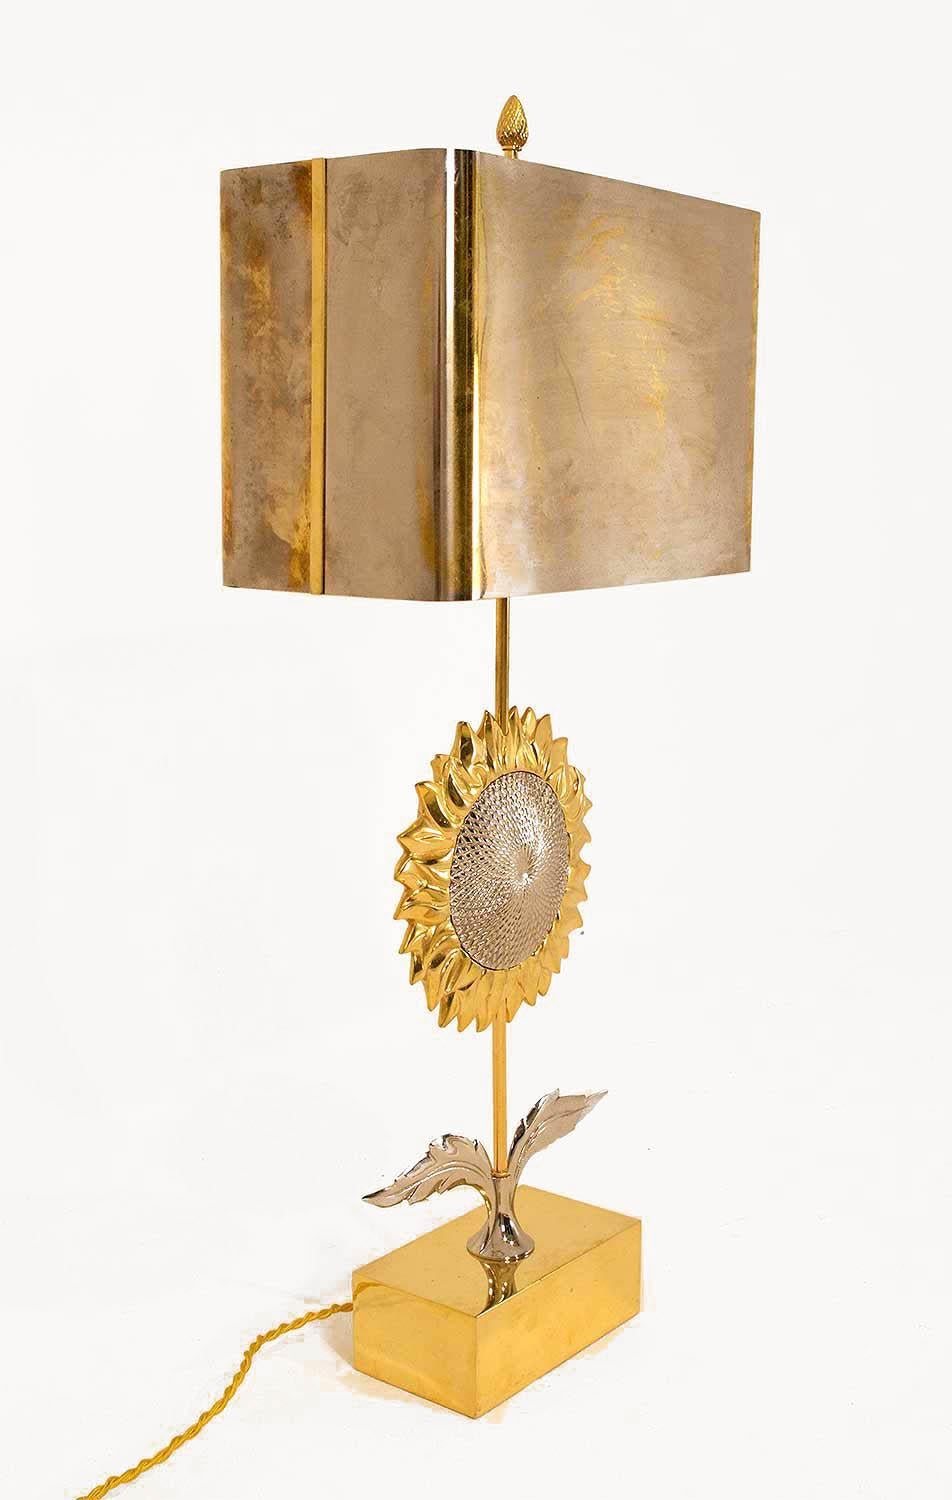 Sunflower lamp by Maison Charles in two patina bronze and brass. Rectangular base in a gilt central structure decorated with a silvered heart sunflower. Rectangular lampshade, topped by a pinecone.
Model created by Chrystiane Charles, work from the